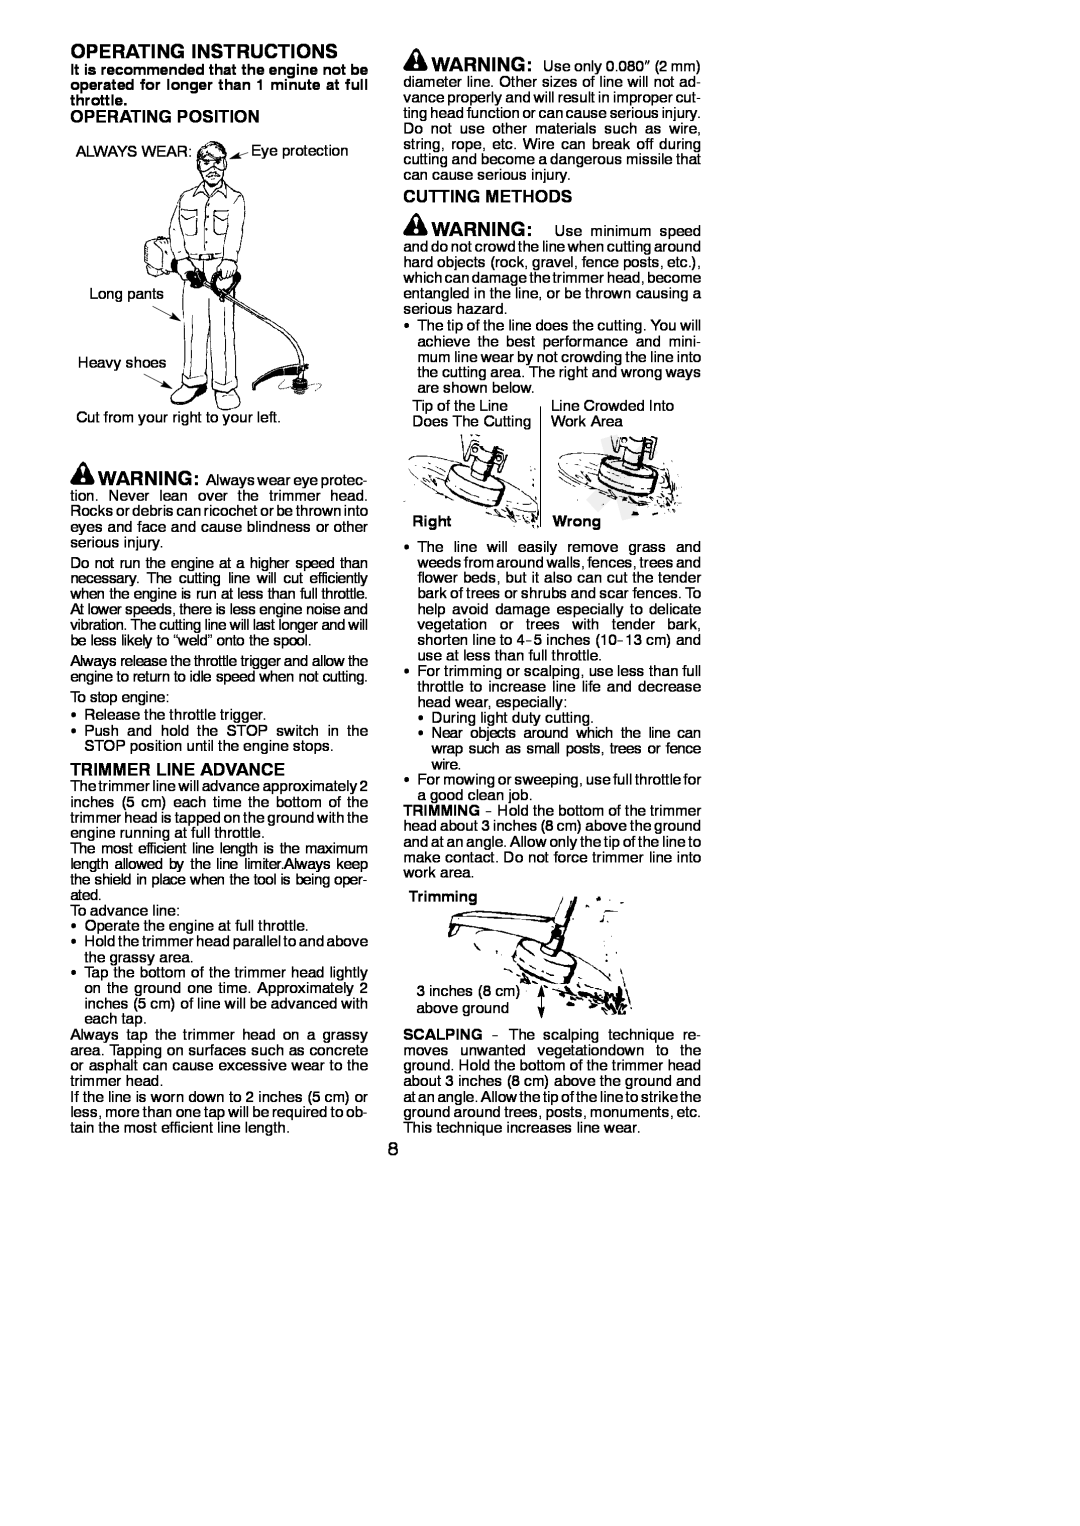 Weed Eater FX26 Operating Instructions, Operating Position, Trimmer Line Advance, Cutting Methods, RightWrong, Trimming 